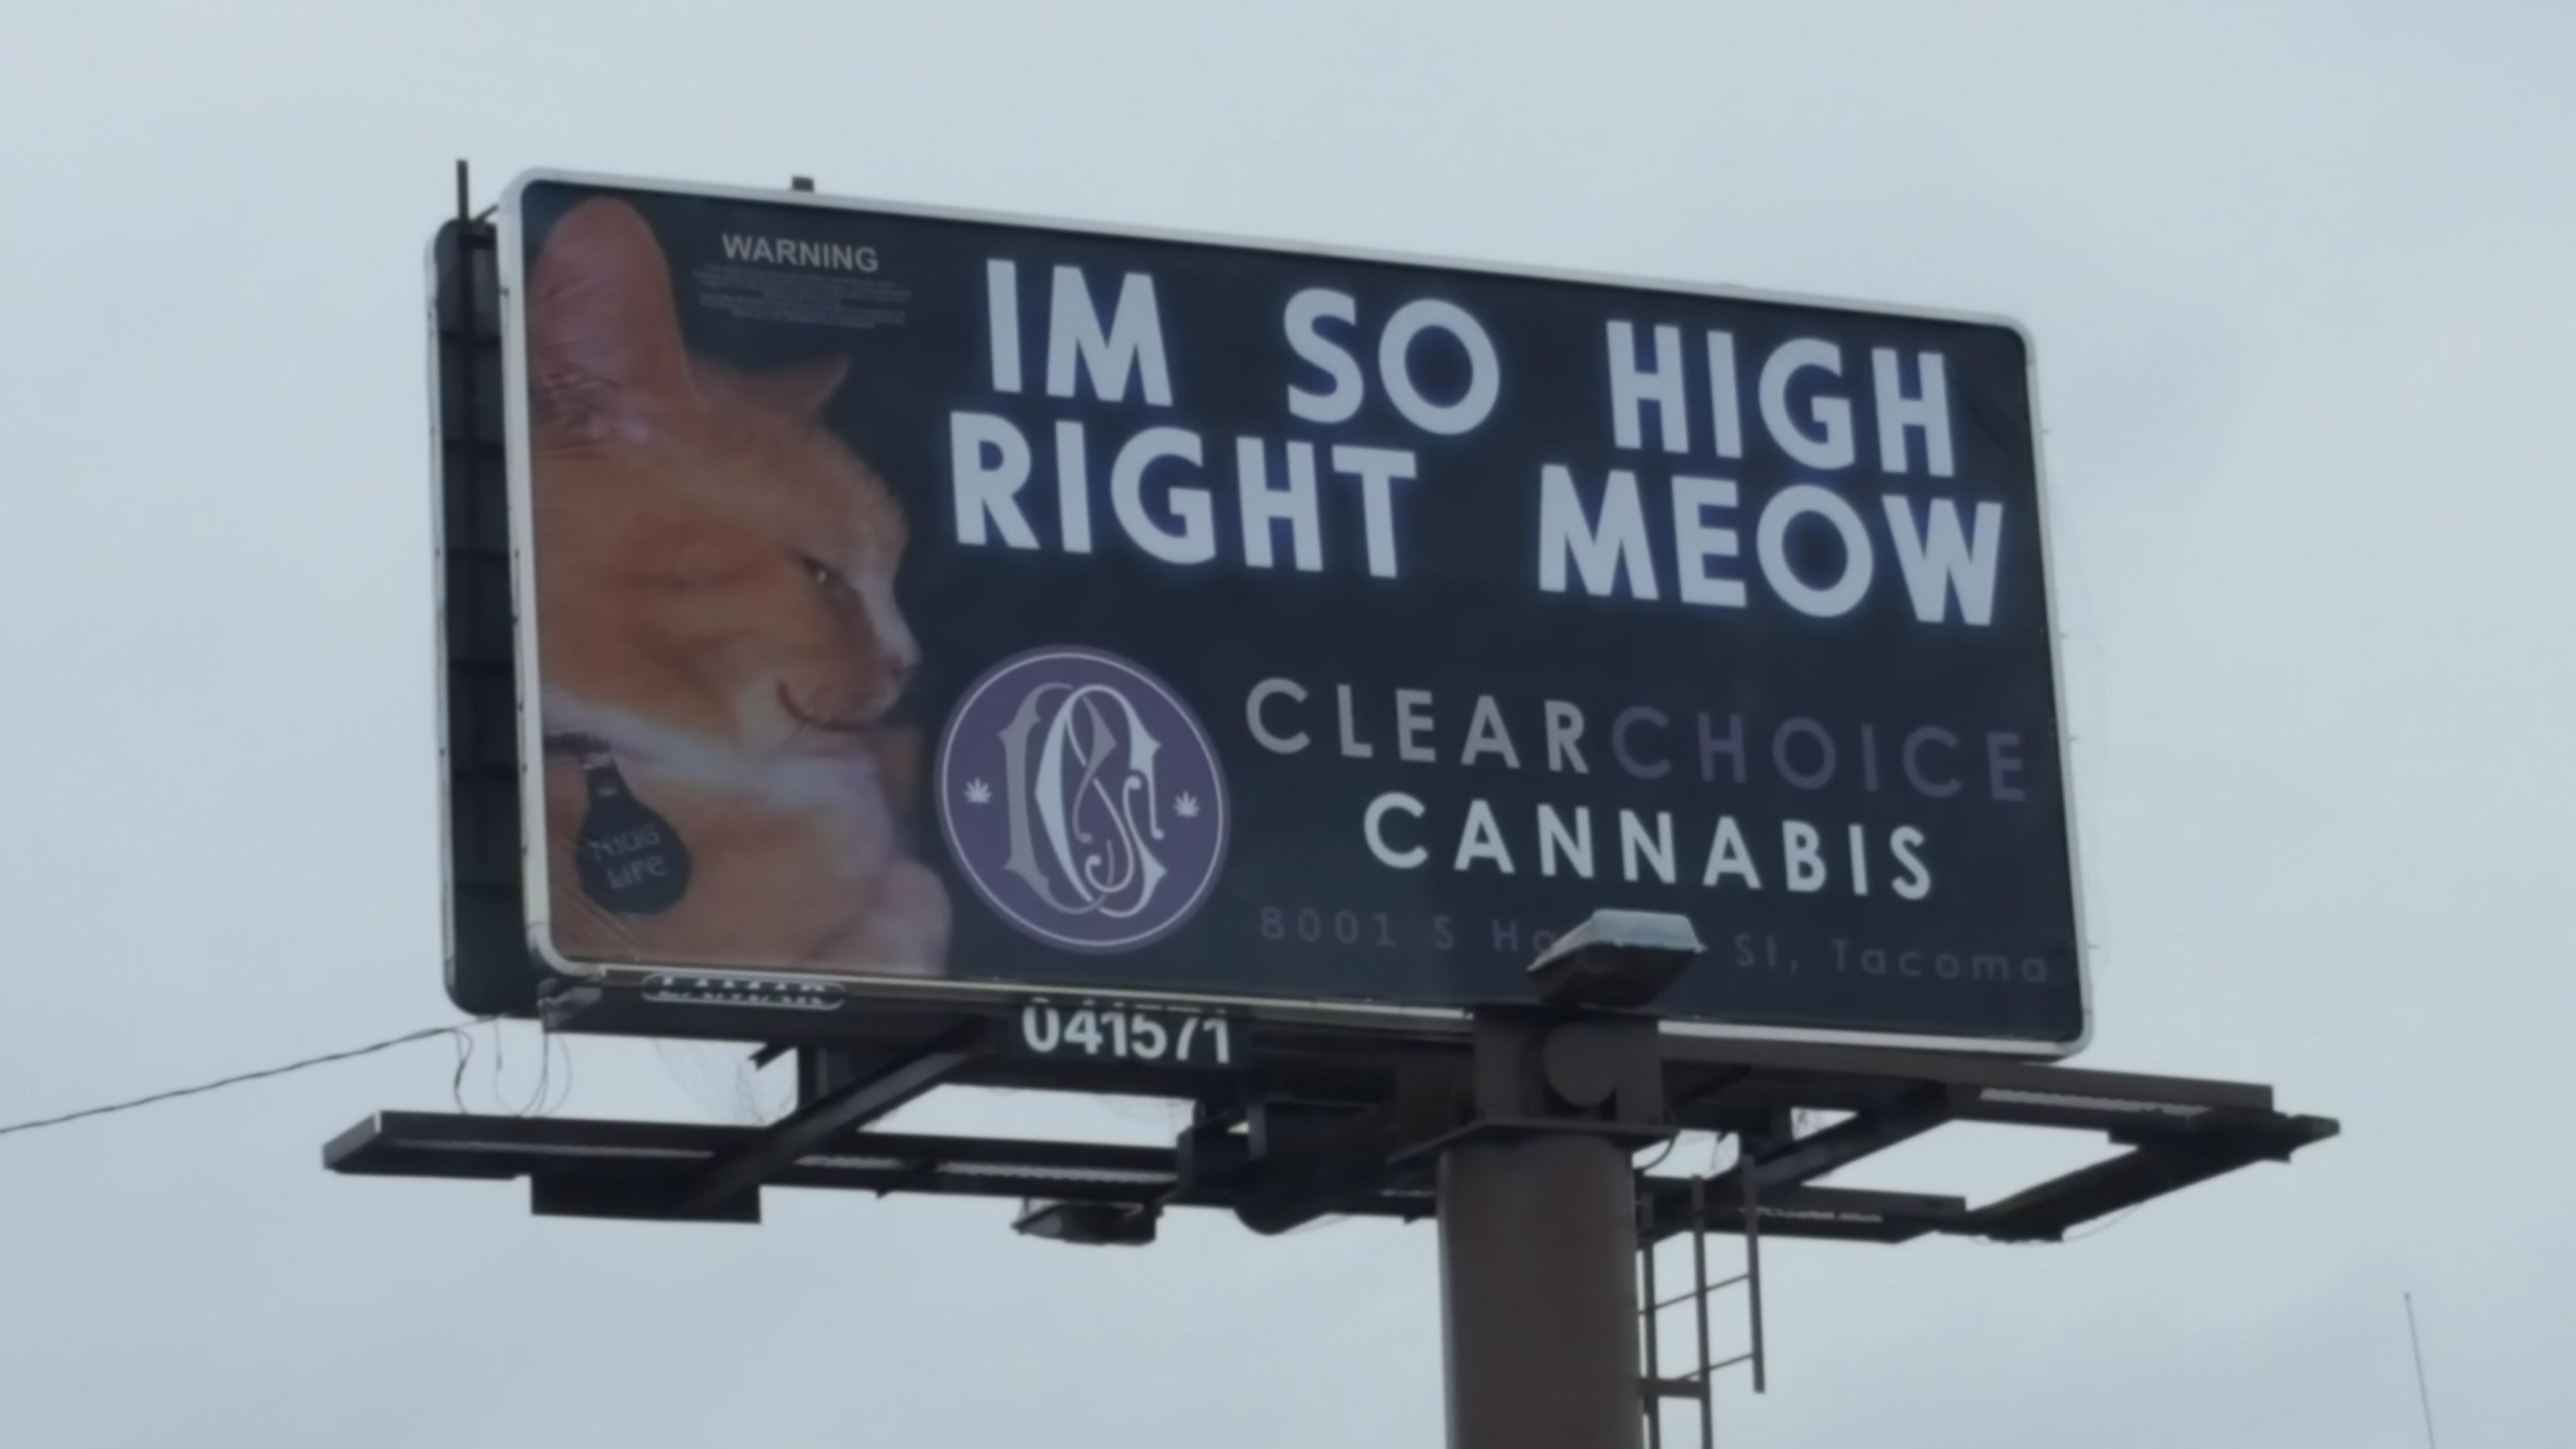 I just drove by this hilarious billboard in my town. Marketing to your correct demographic